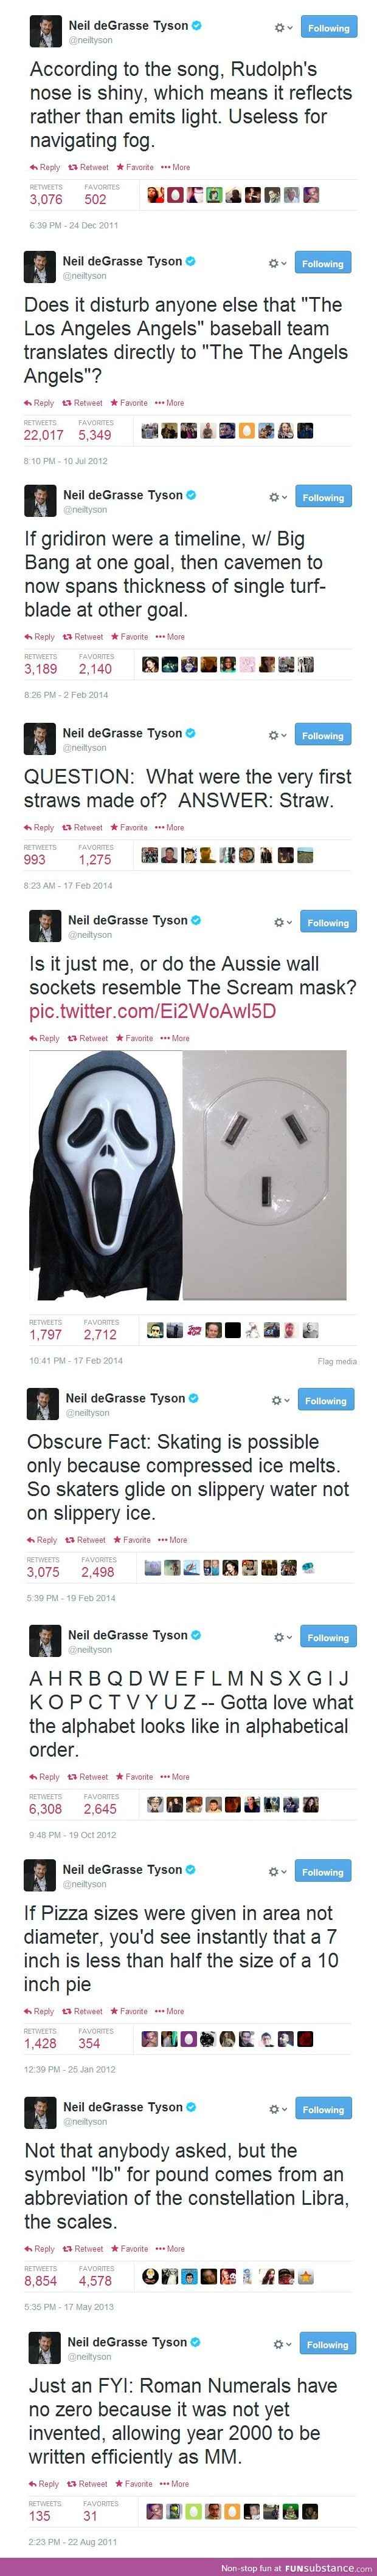 A Collection of Neil deGrasse Tyson's Tweets